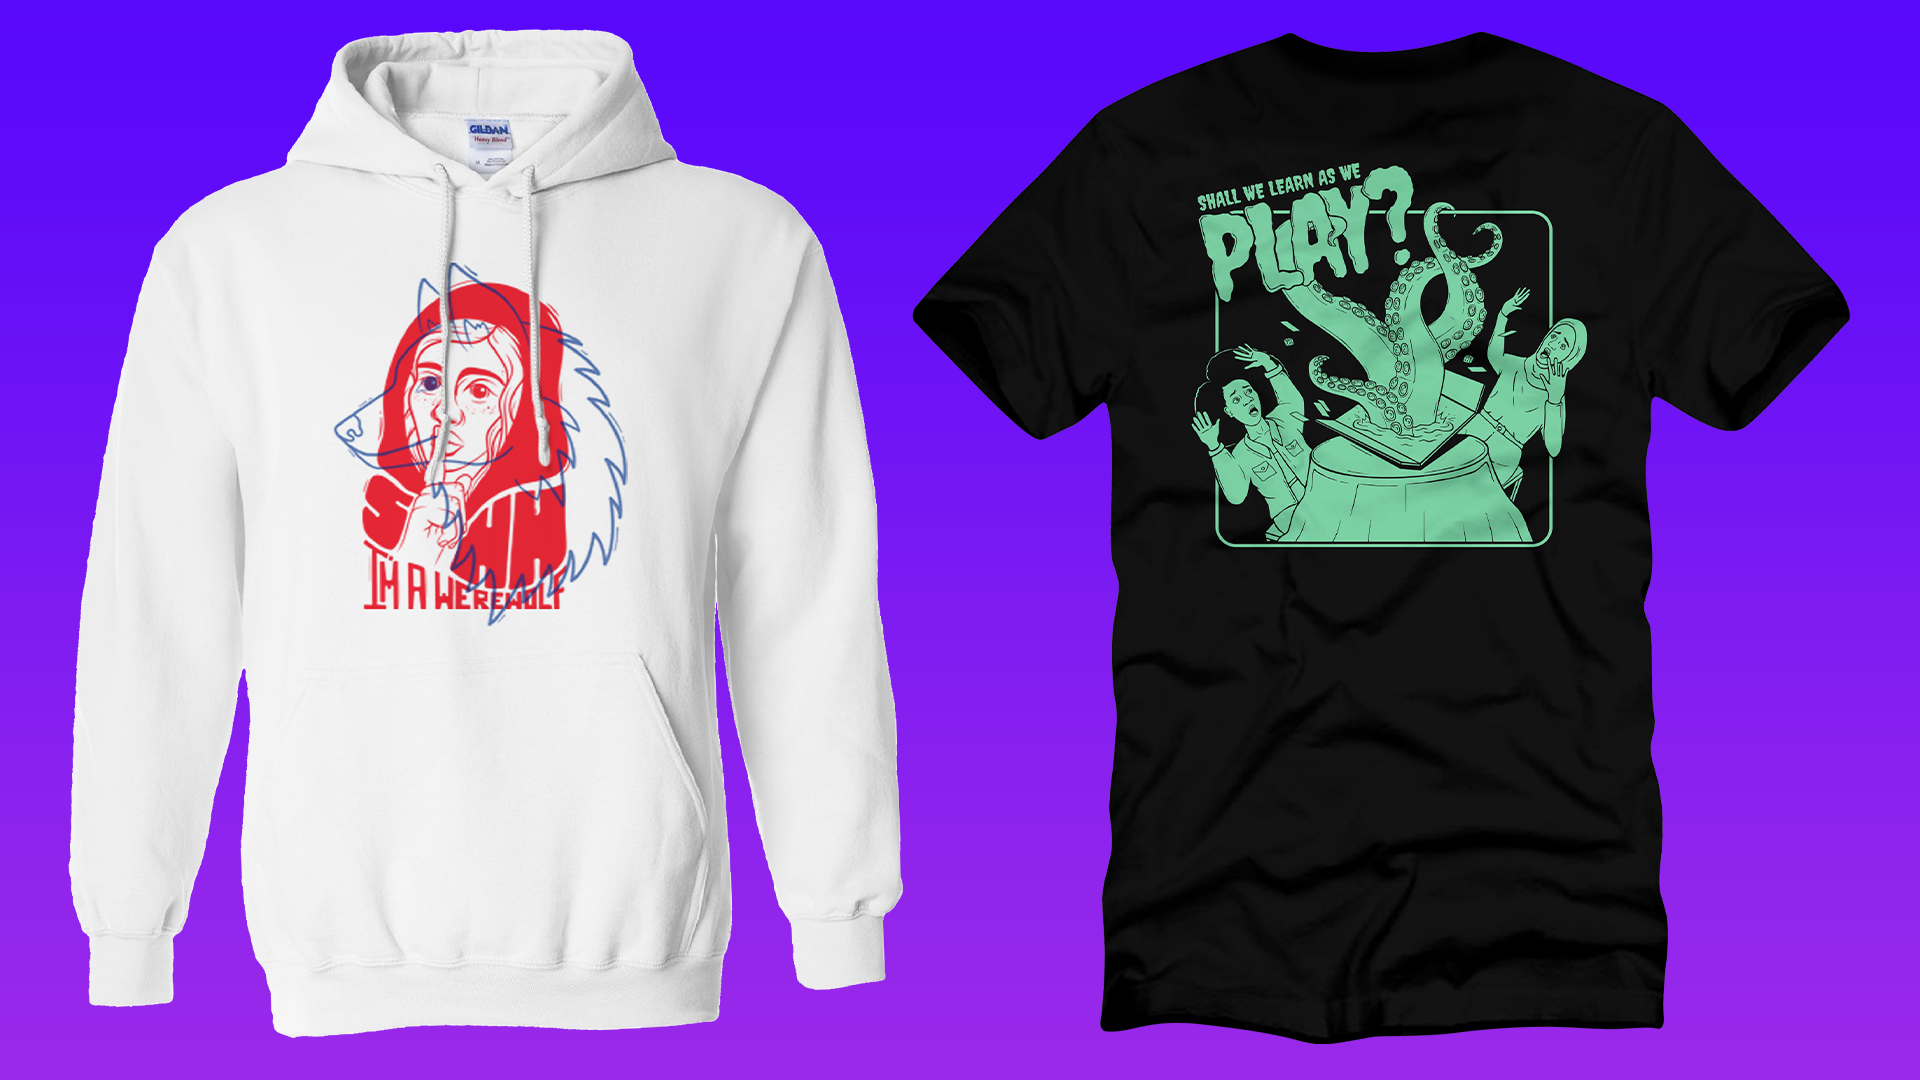 Image for Show off your love of board games in style with new Dicebreaker merch!